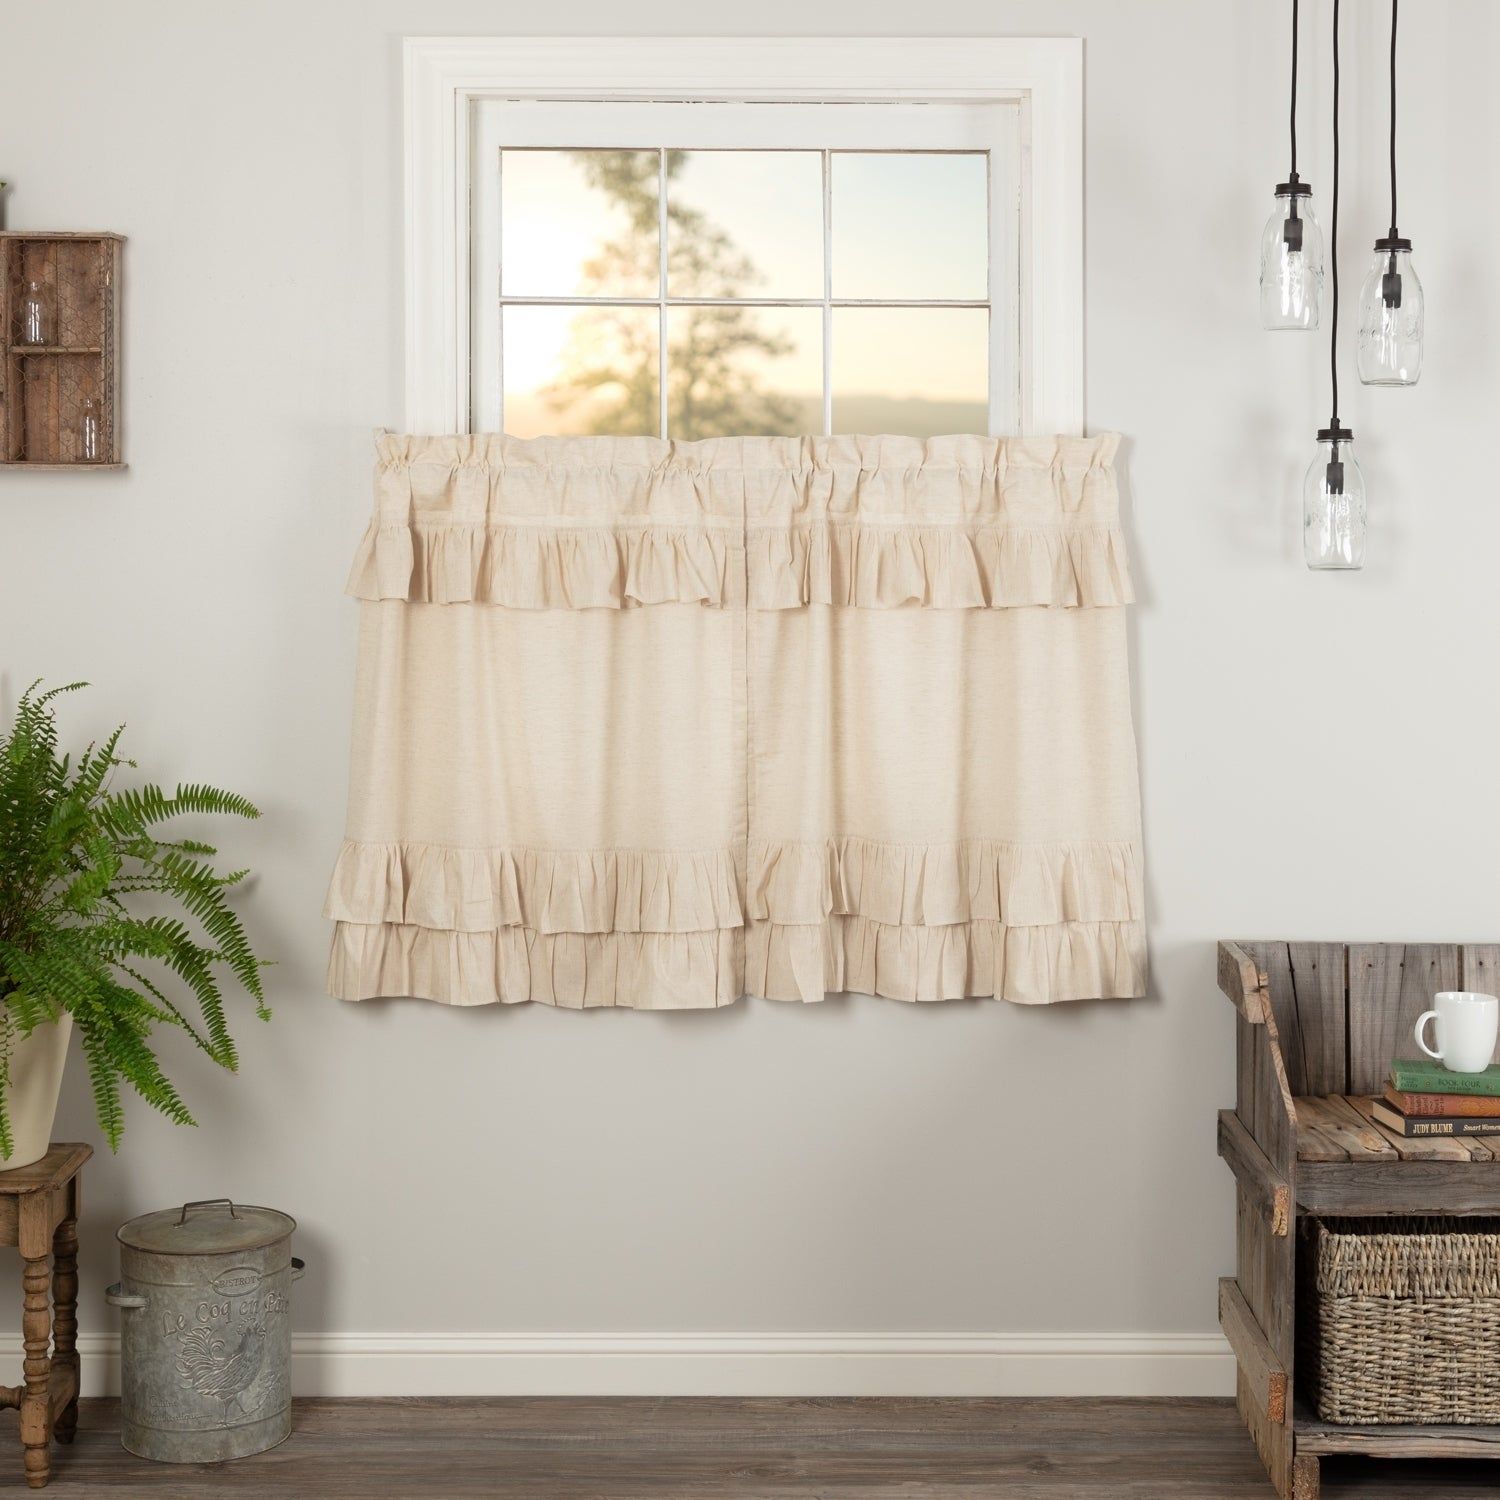 Farmhouse Kitchen Curtains Vhc Simple Life Flax Tier Pair Rod Pocket Cotton  Linen Blend Solid Color Flax Intended For Farmhouse Kitchen Curtains (View 6 of 20)